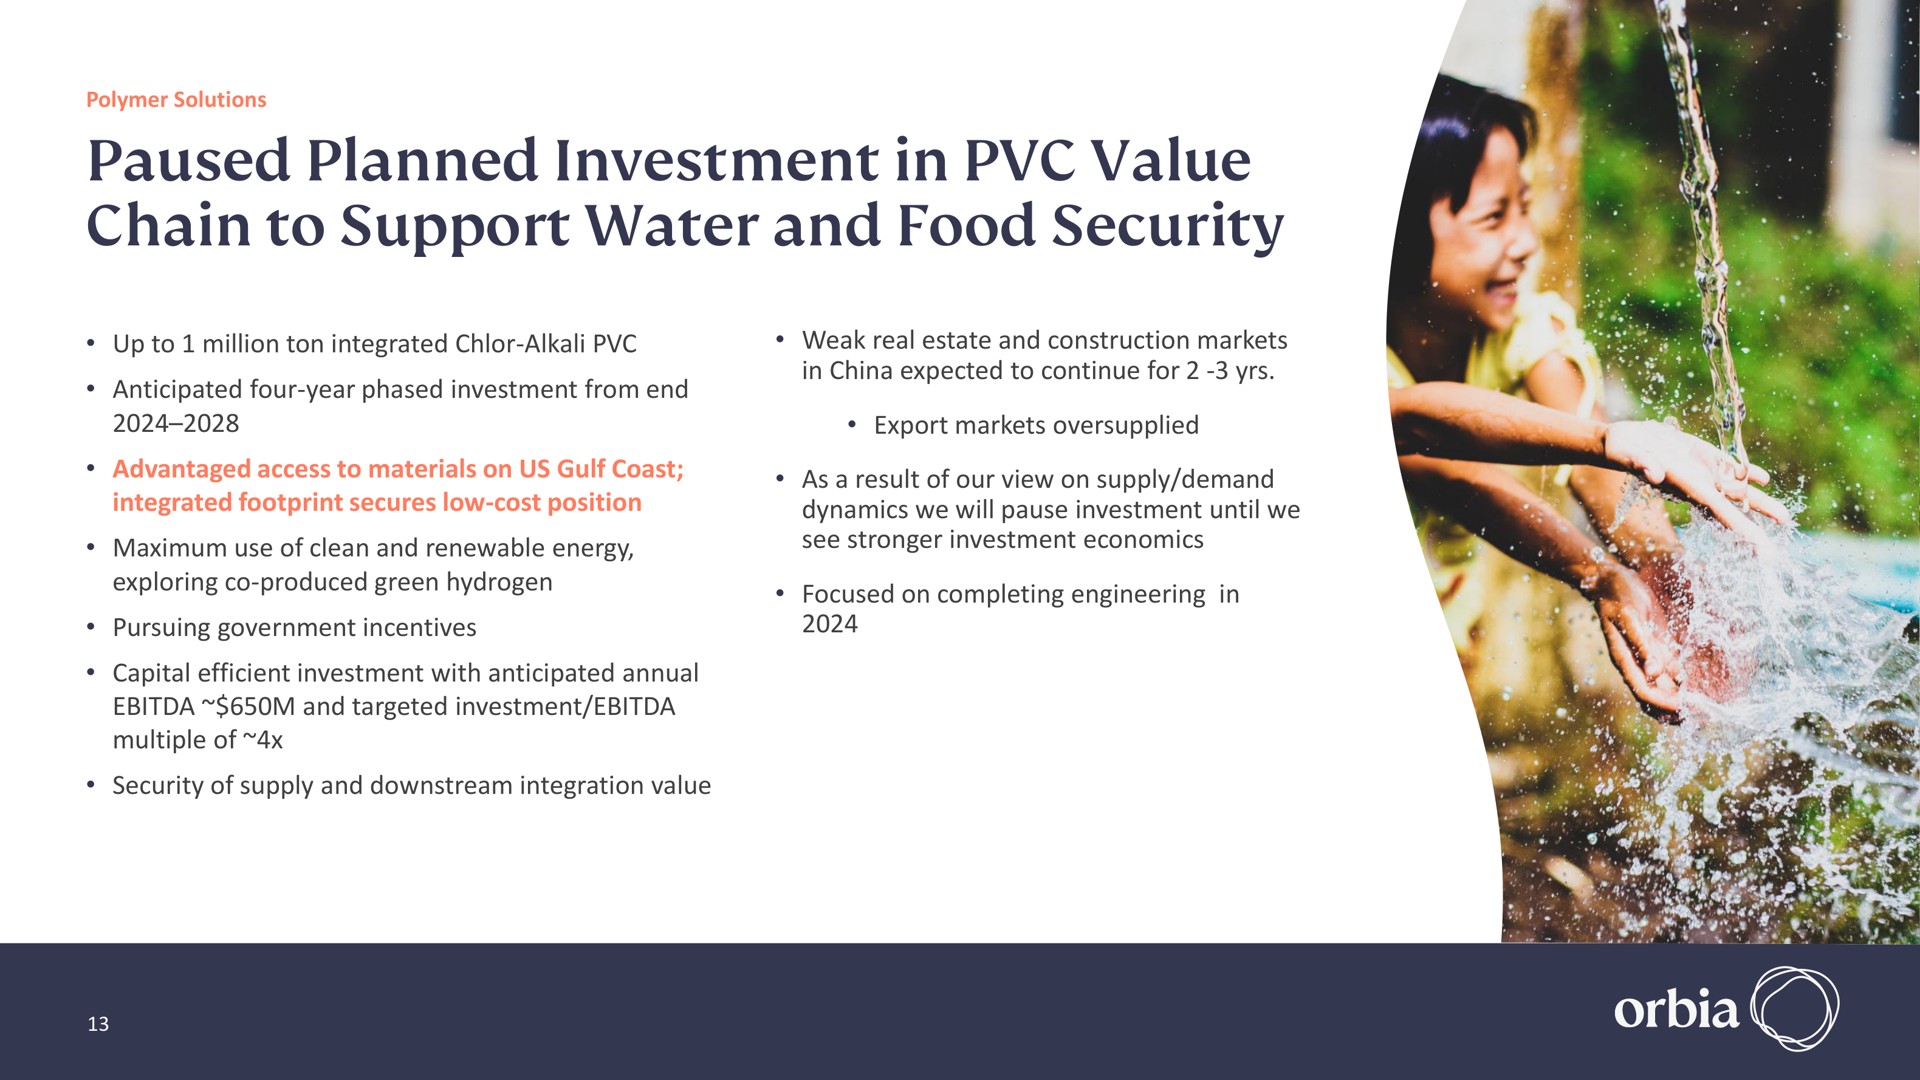 paused planned investment in value chain to support water and food security | Orbia